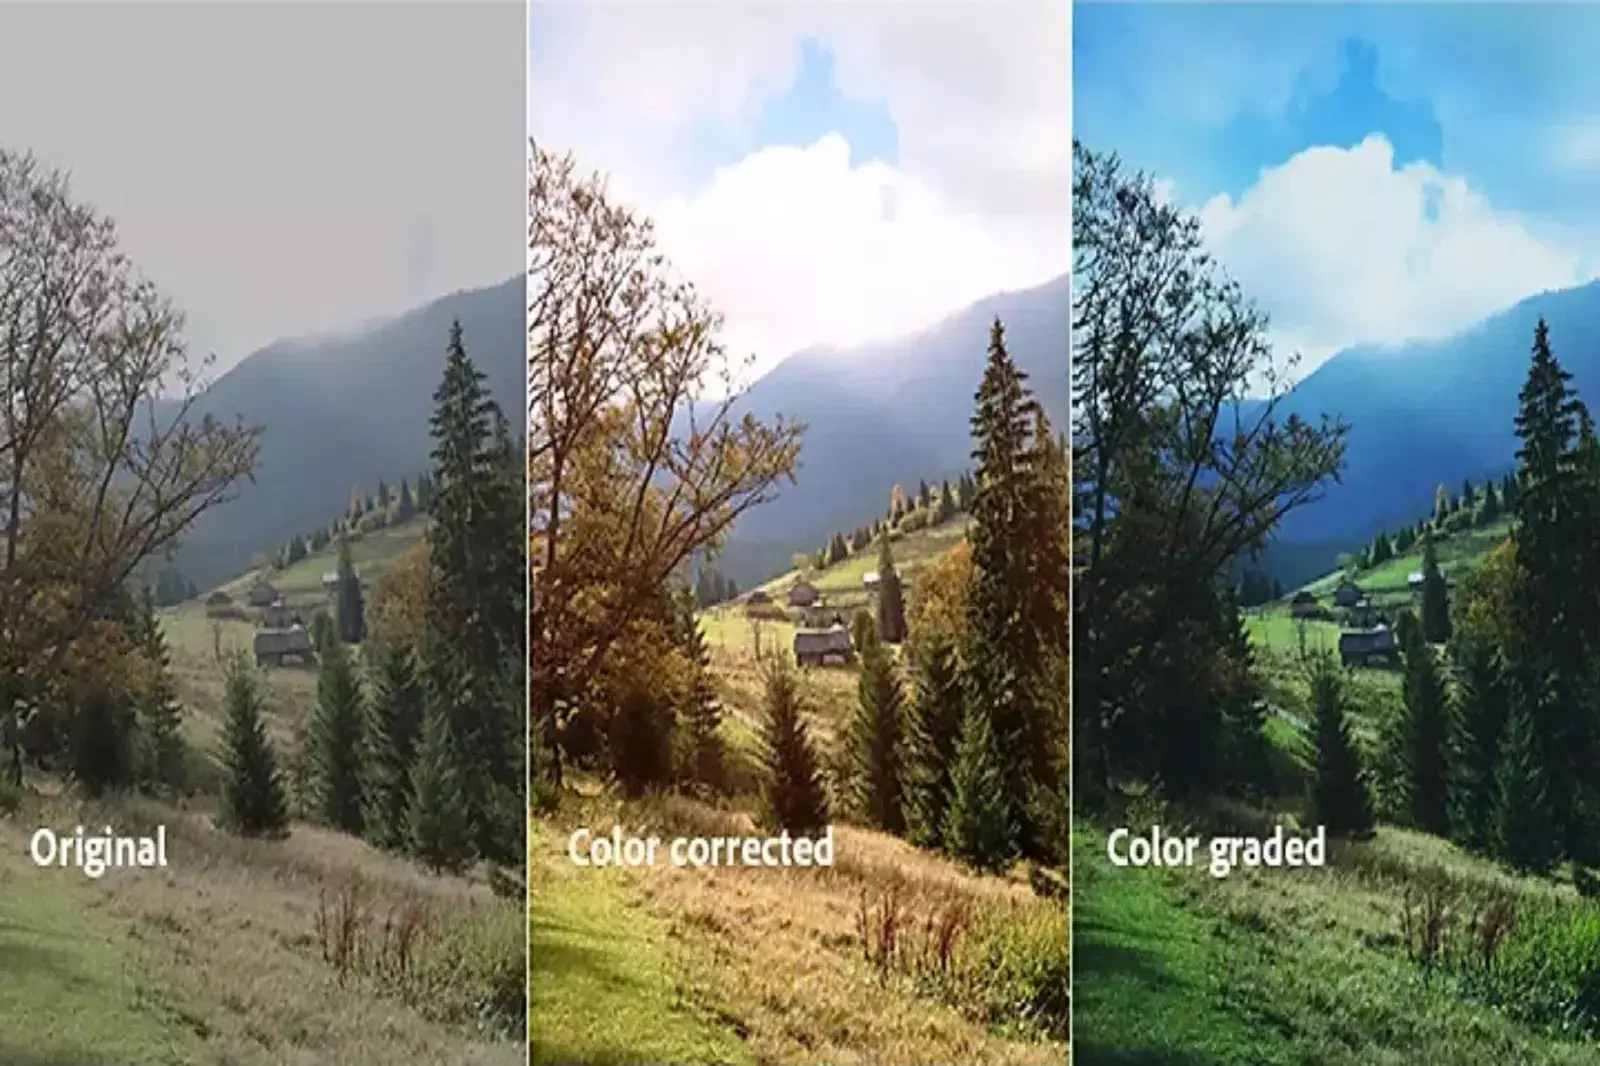 How do Color Grading and Correction Work Together?